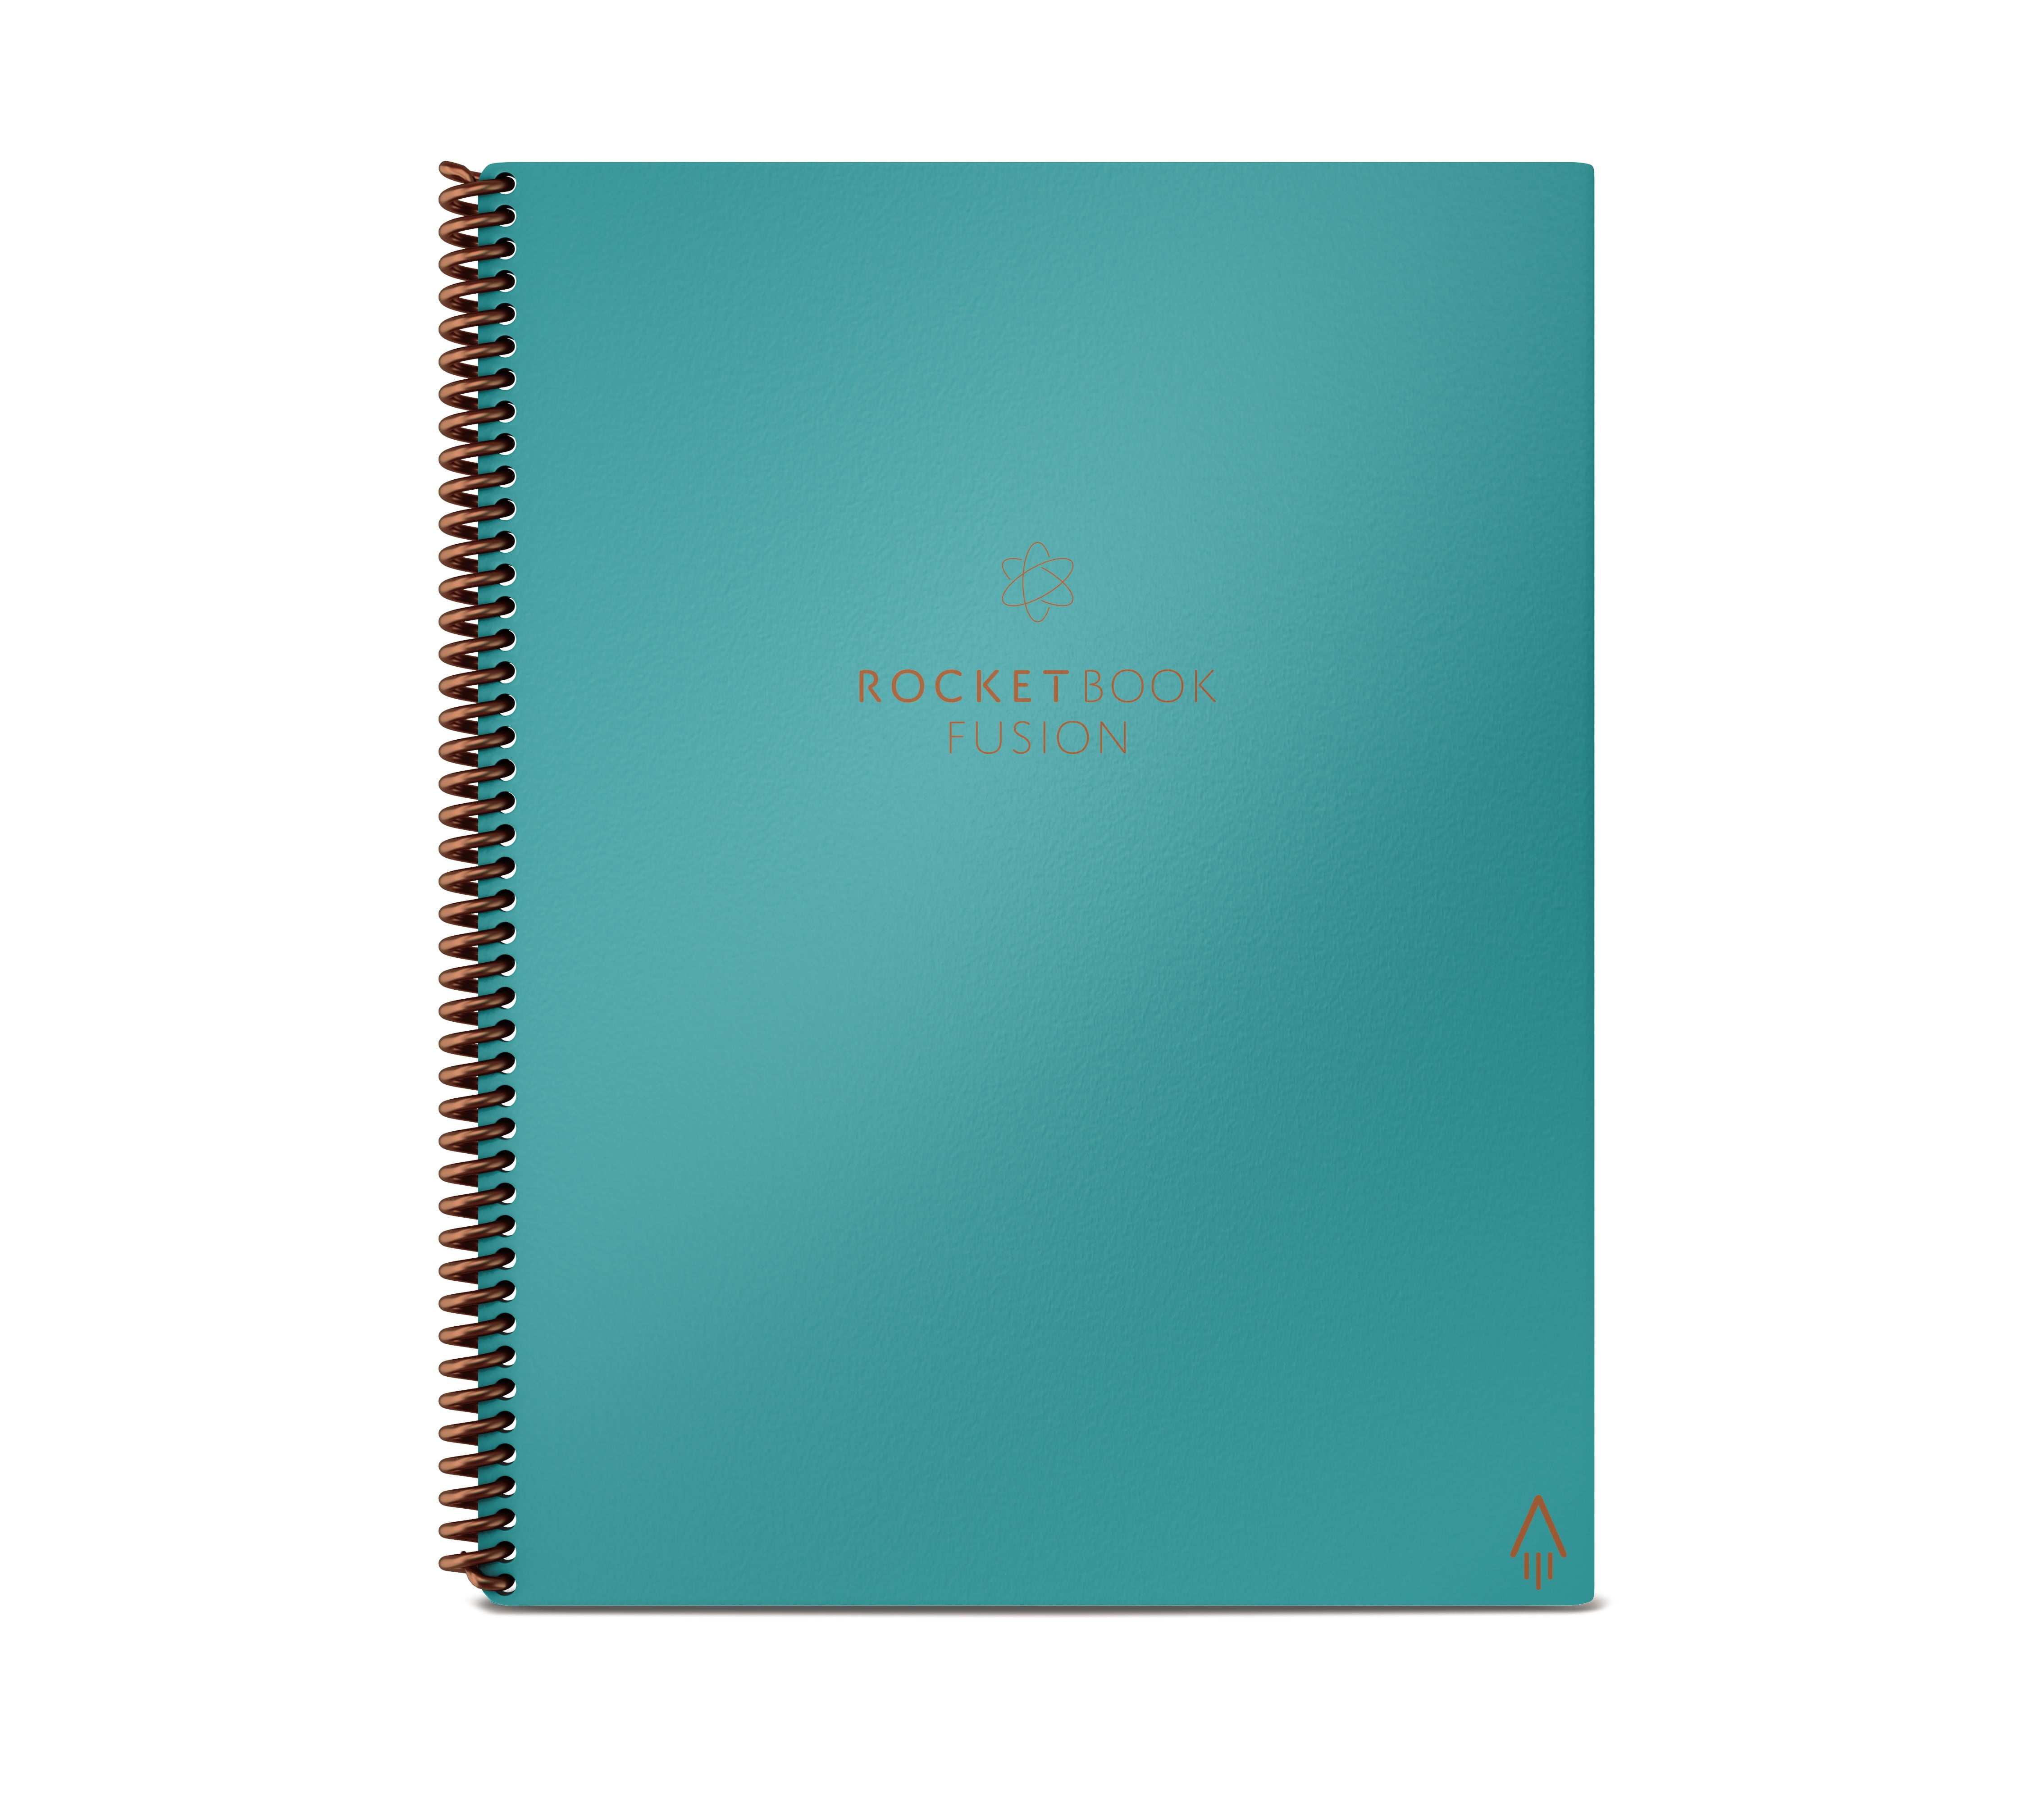 Rocketbook Fusion Smart Reusable Spiral Notebook, Teal, Letter Size  Eco-Friendly Notebook (8.5 x 11), Planner, Task List, Calendar and More,  Includes 1 Pen and Microfiber Cloth 